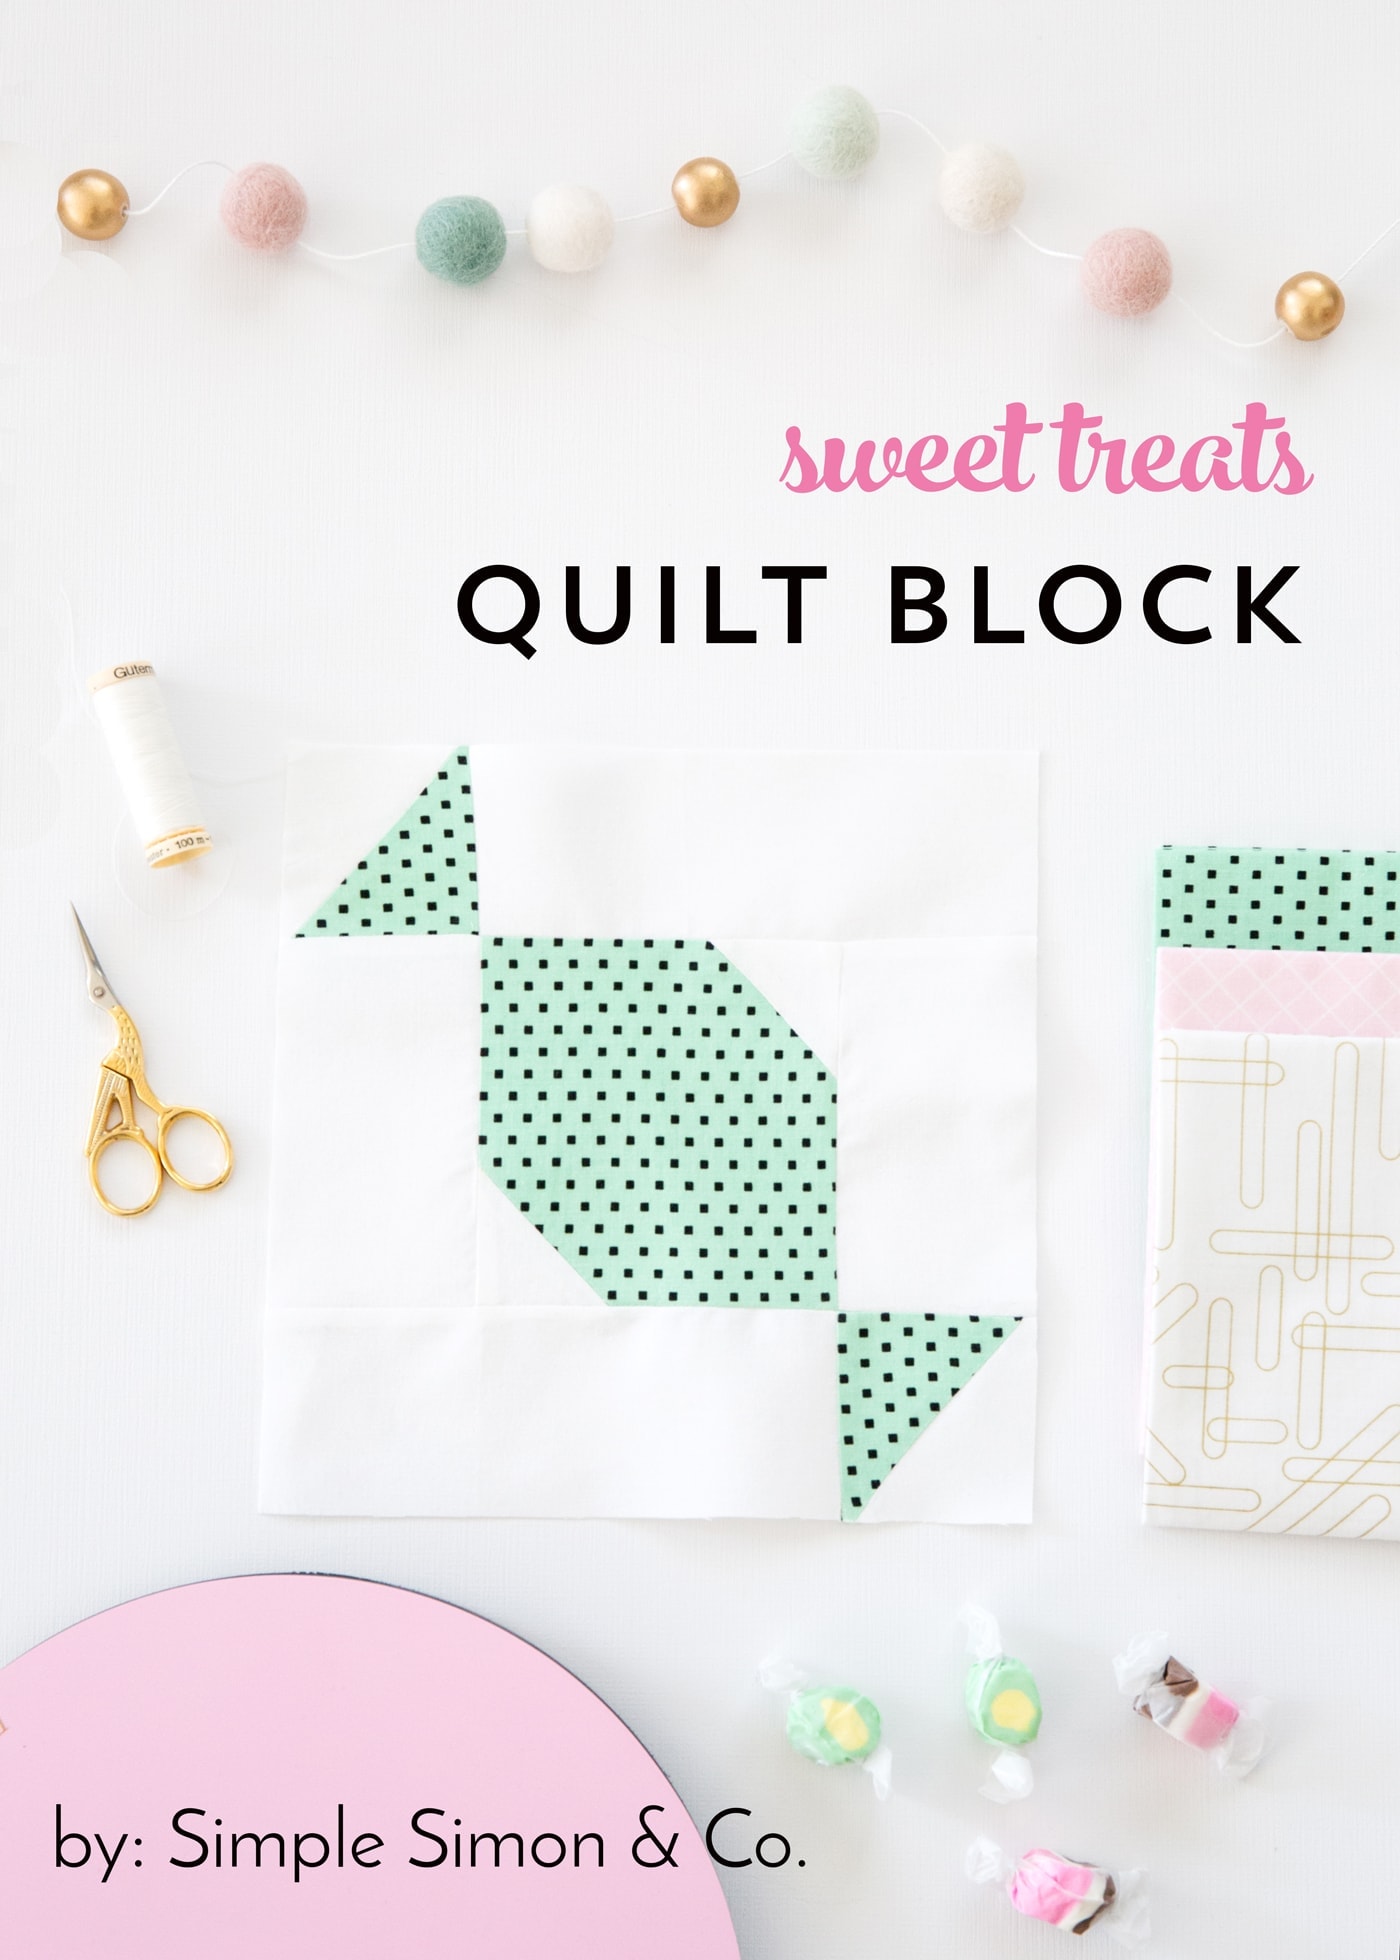 A free quilt block tutorial for a Sweet Treats Quilt Block - would make such a fun Christmas quilt. #quiltblock #quilts #quiltblocktutorial #freequiltpatterns